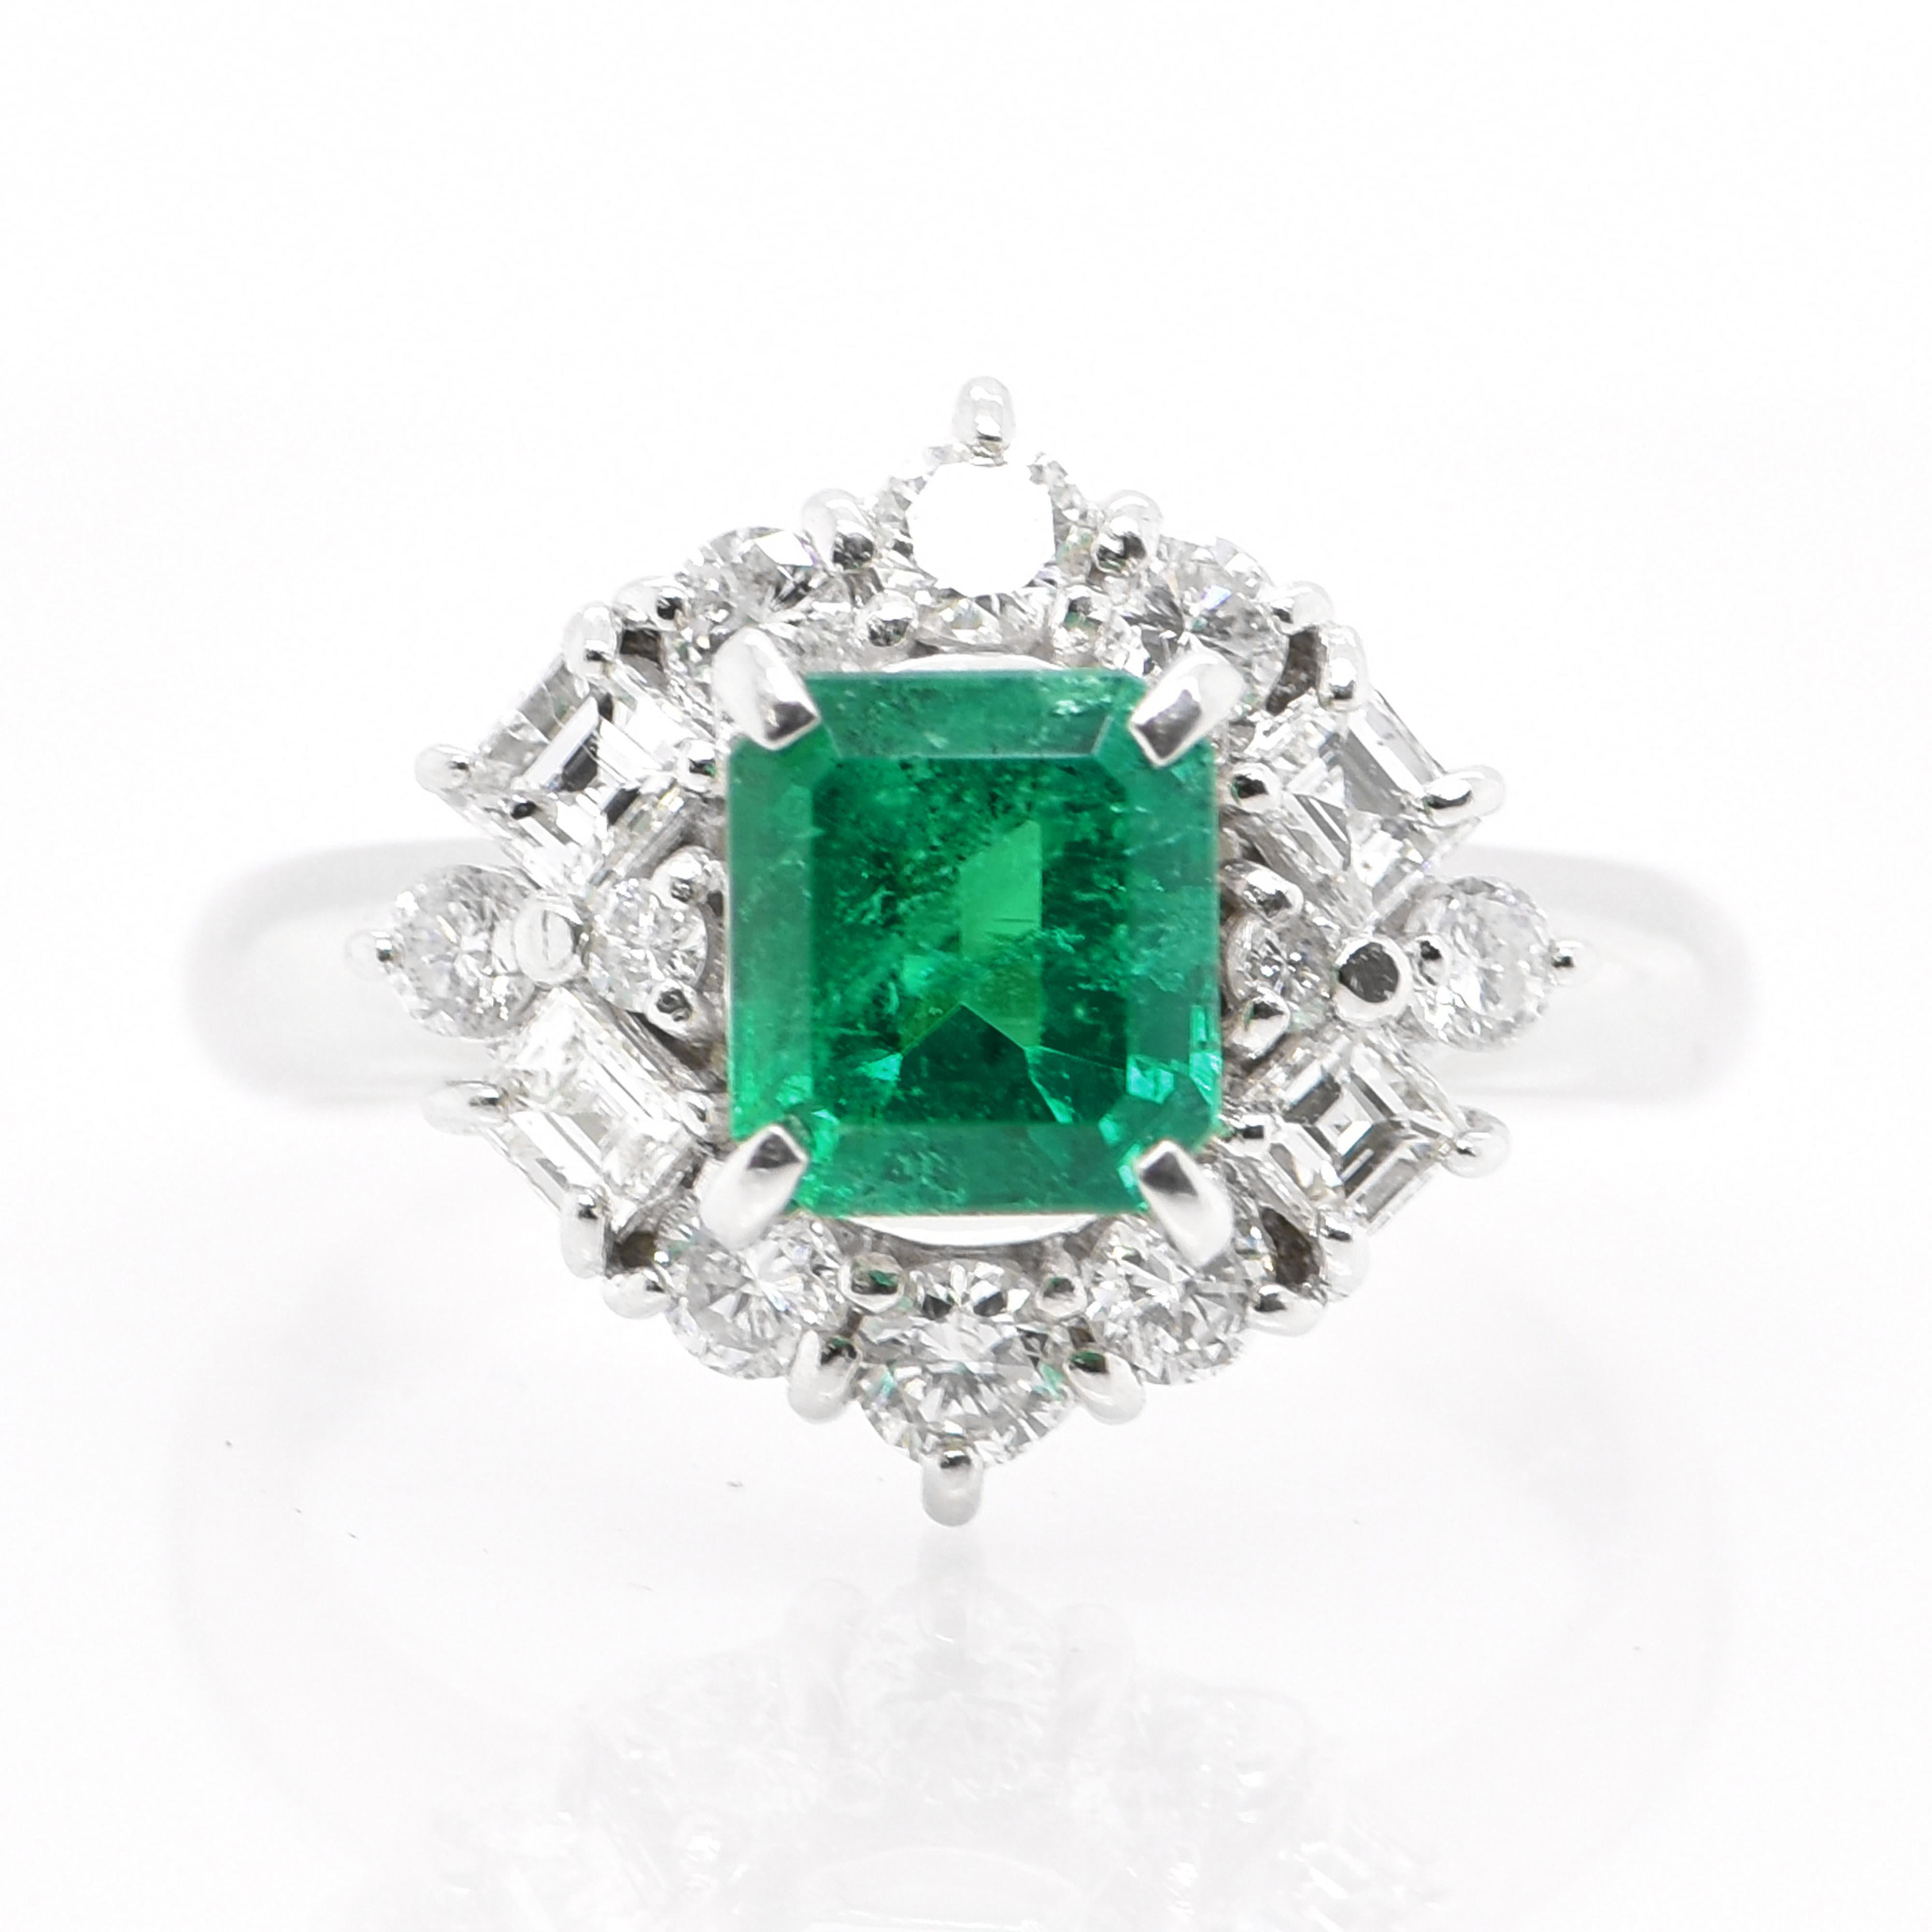 GIA Certified 1.15 Carat Untreated (No Oil) Colombian Emerald Ring in Platinum